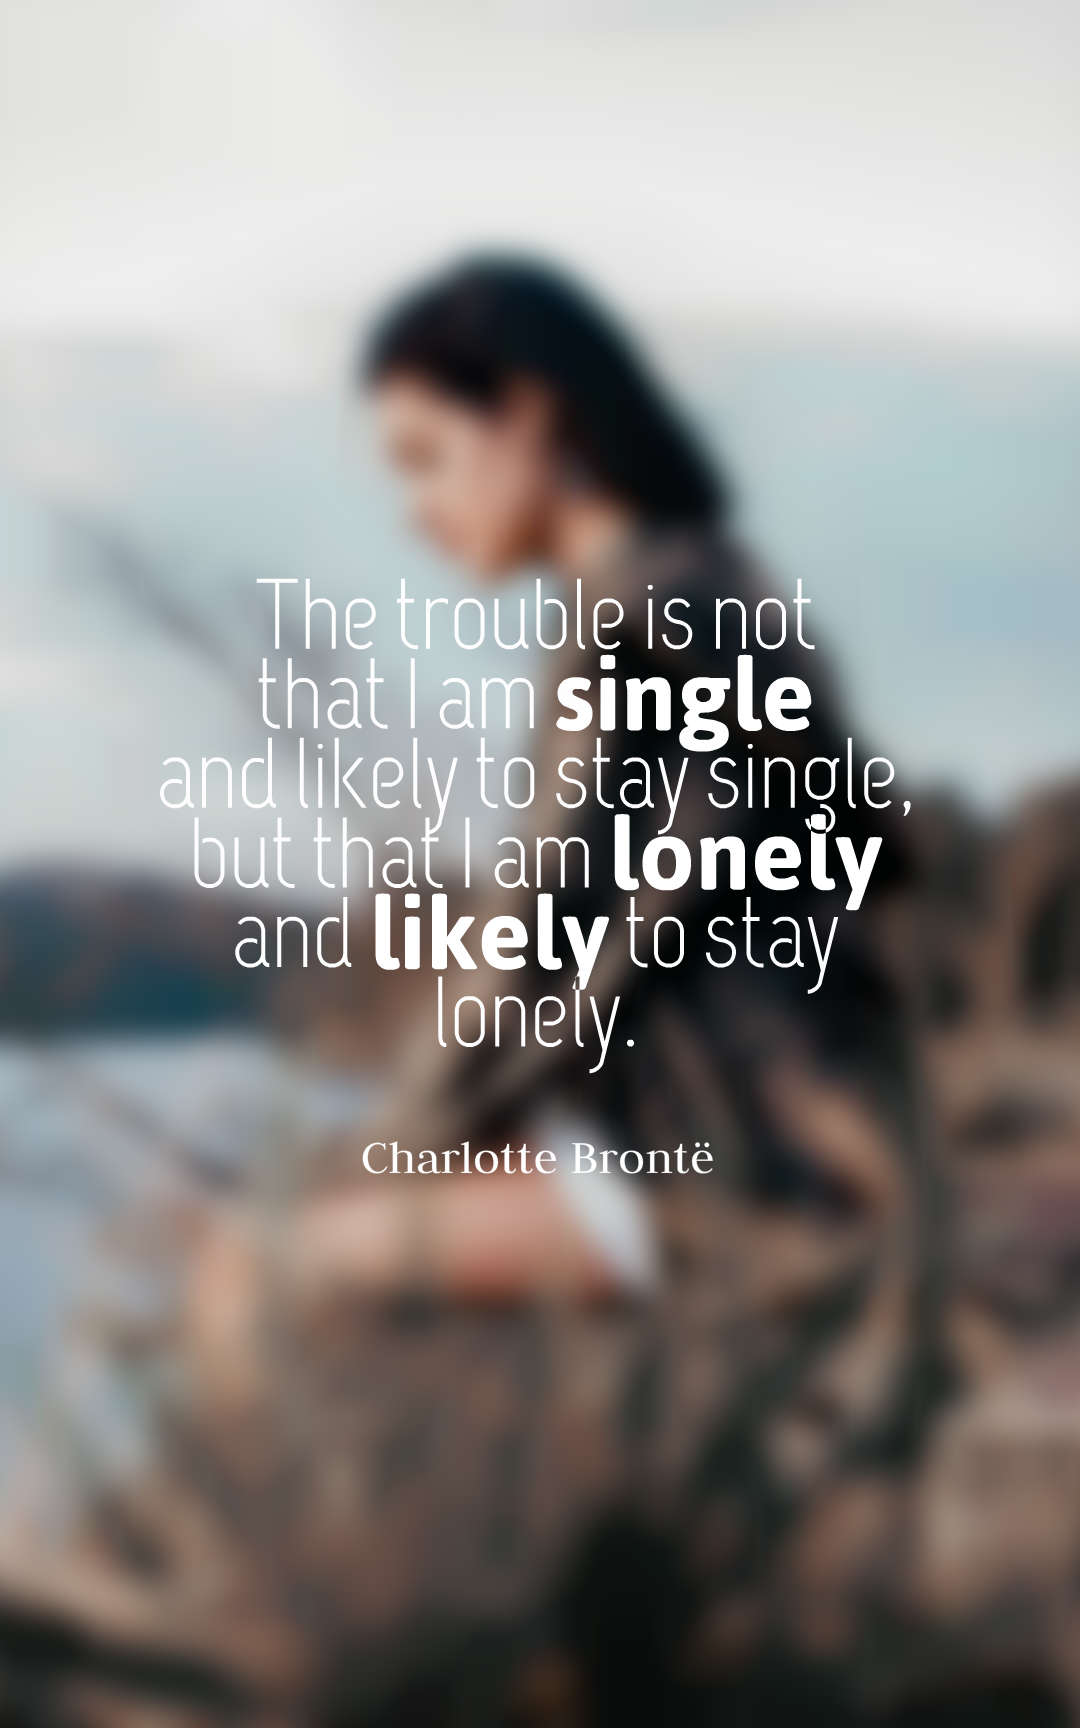 Best Loneliness Quotes: 45 Lonely Quotes with Images